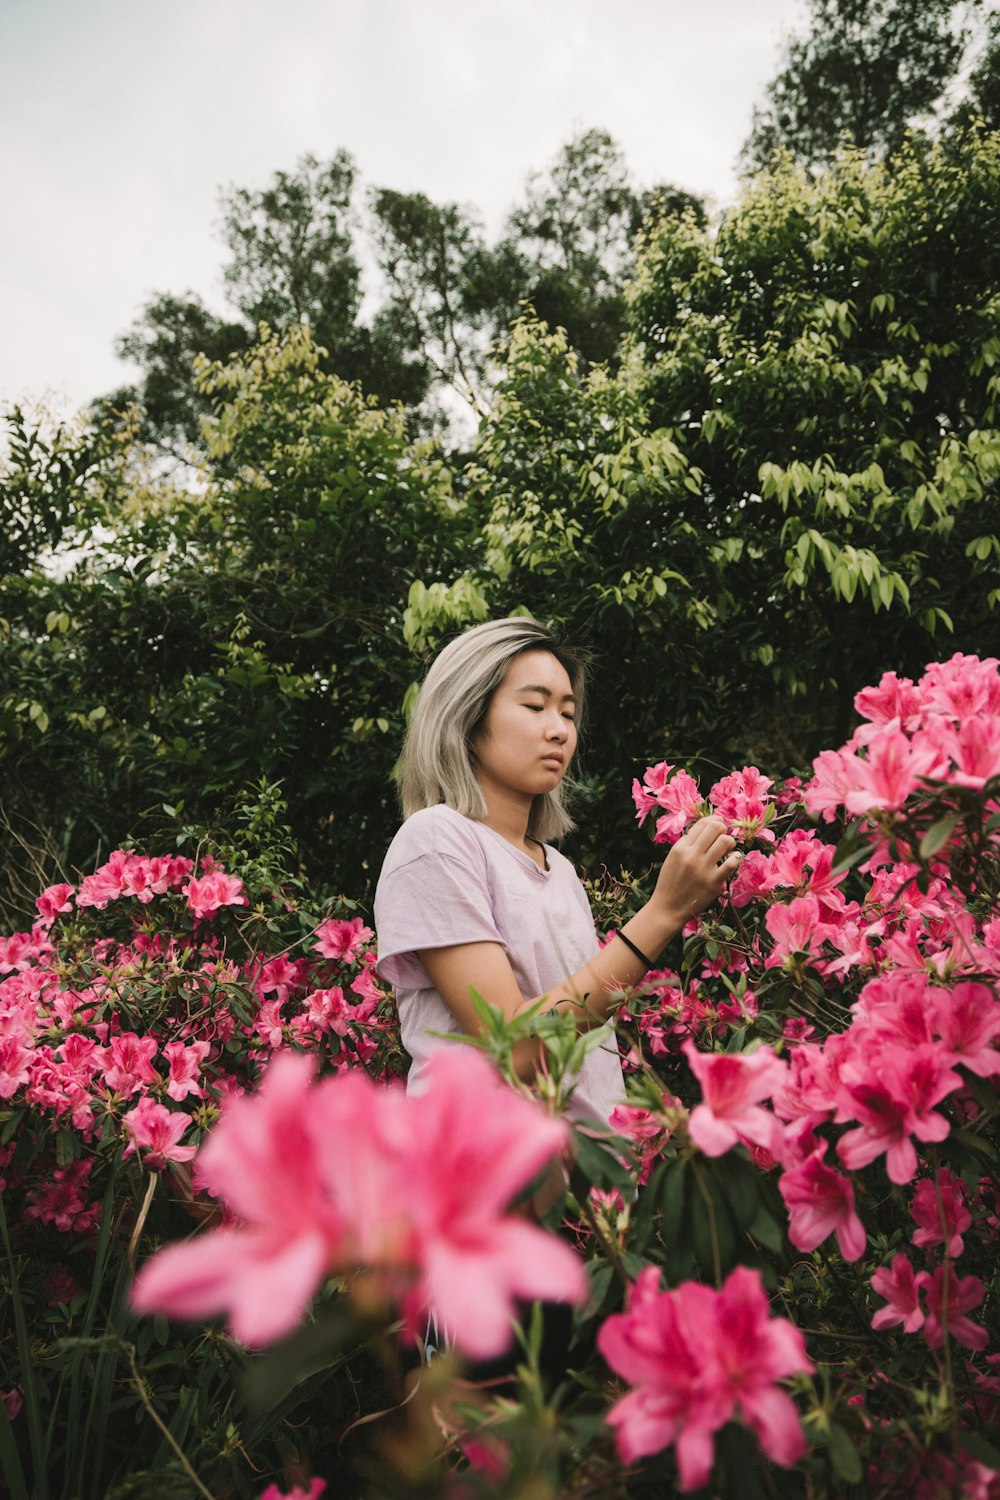 woman in white t-shirt standing near pink flowers during daytime